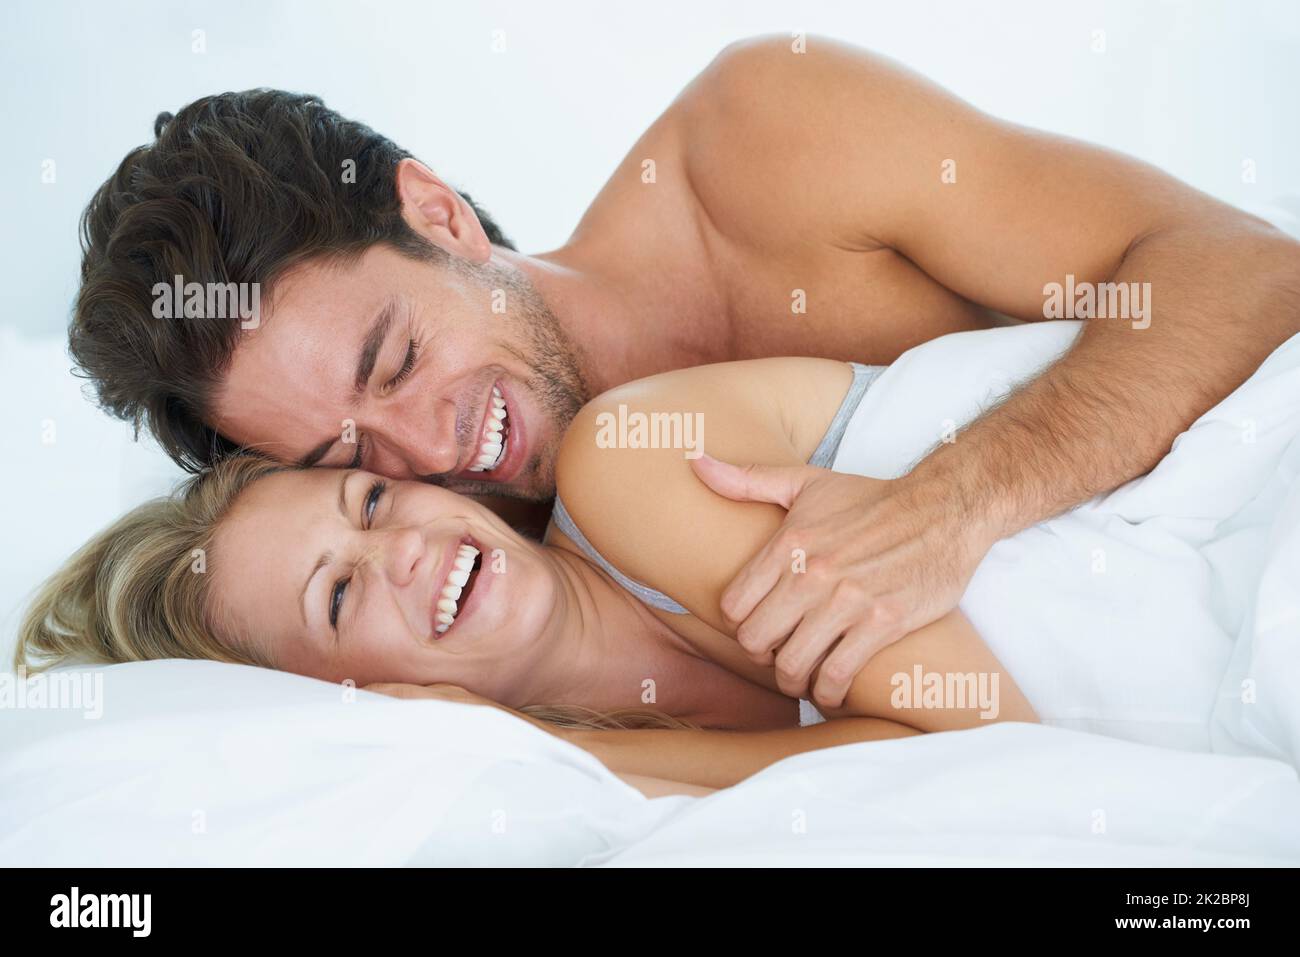 Magical mornings together. A husband embracing his wife affectionately while lying in bed together. Stock Photo